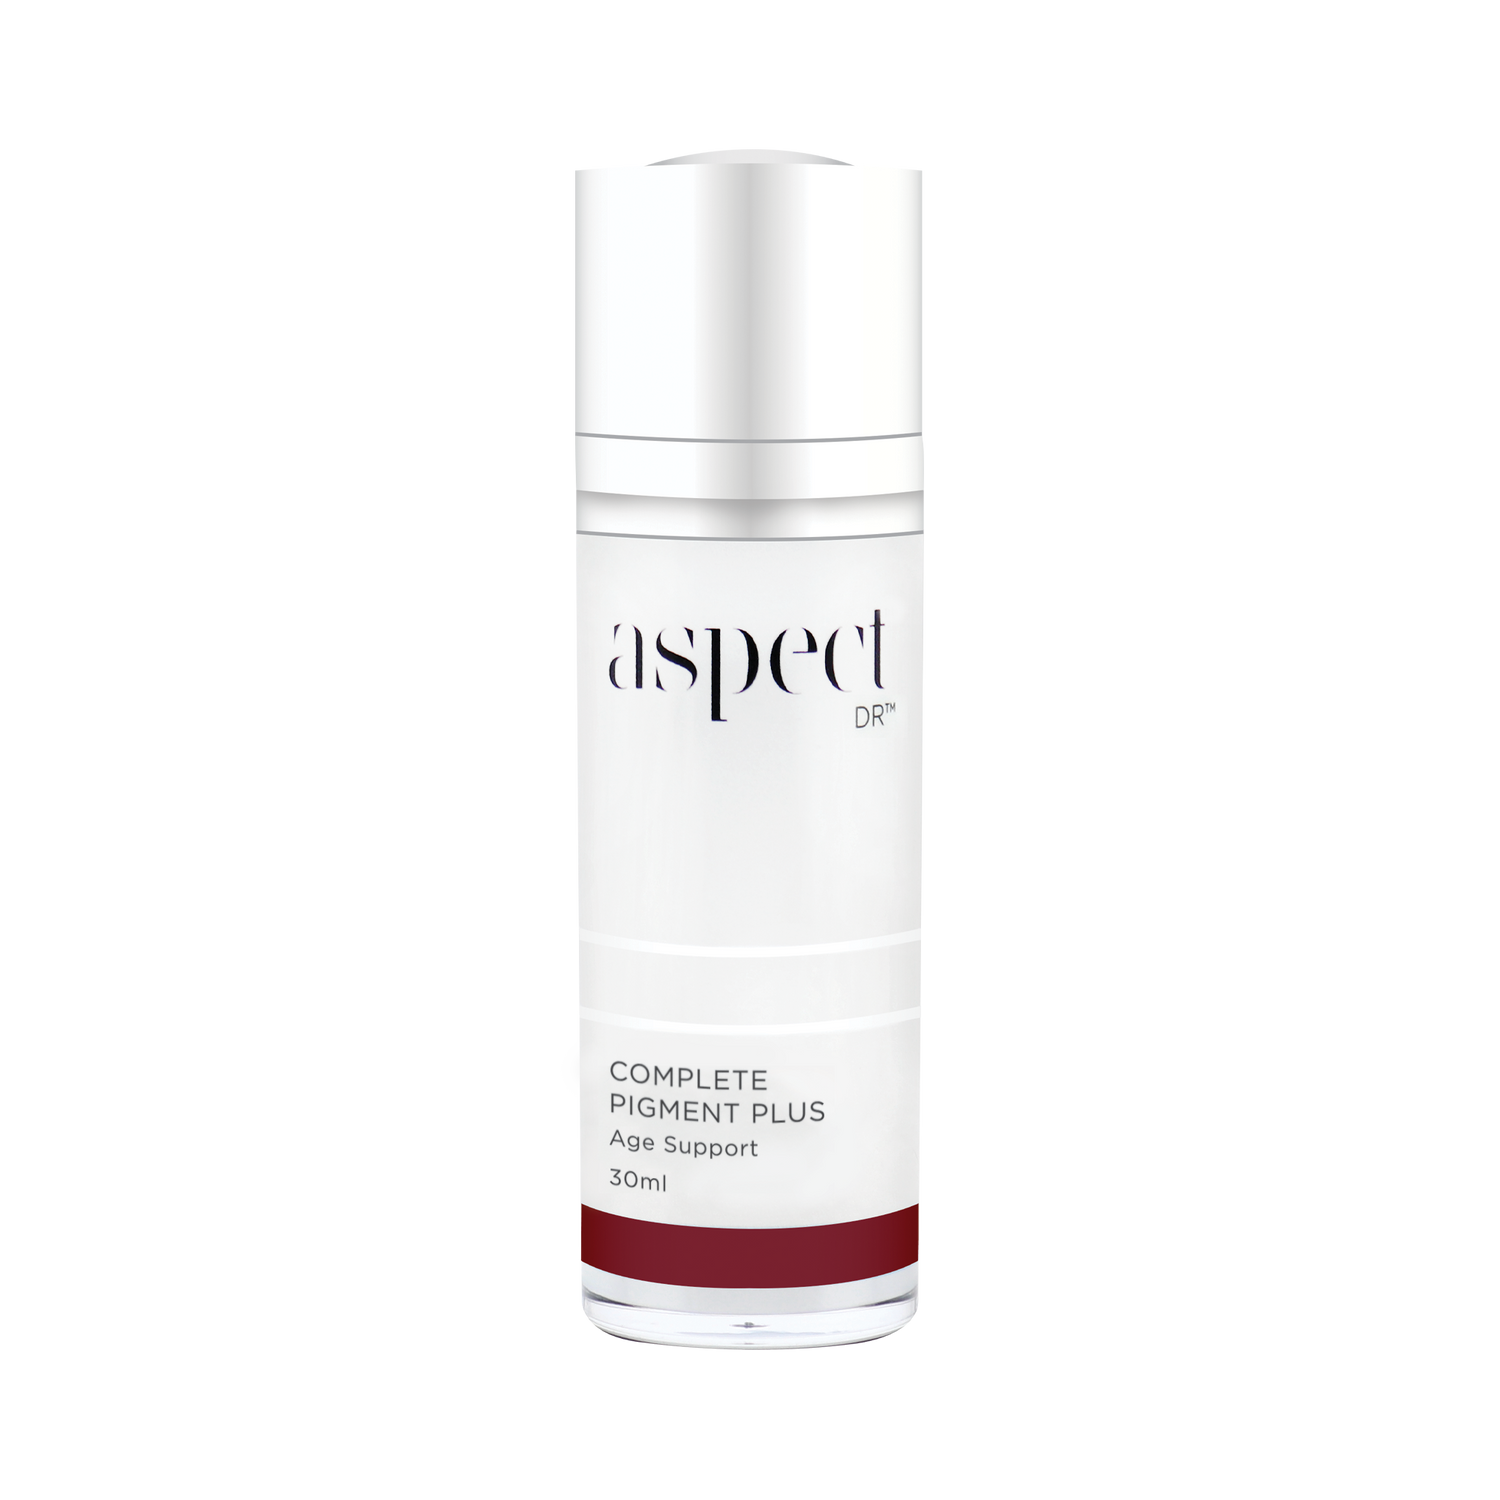 Aspect Dr Complete Pigment Plus Age Support | Experience a ground-breaking solution to pigment correction with our all-new Complete Pigment Plus Age Support serum. This effective yet gentle serum is formulated with antioxidants and phytoestrogens to visibly minimise the appearance of fine lines, wrinkles, skin discolouration, and age spots. With added barrier-fortifying ingredients ideal for hormonally imbalanced or sensitised skin, this serum will promote a bright and youthful complexion.